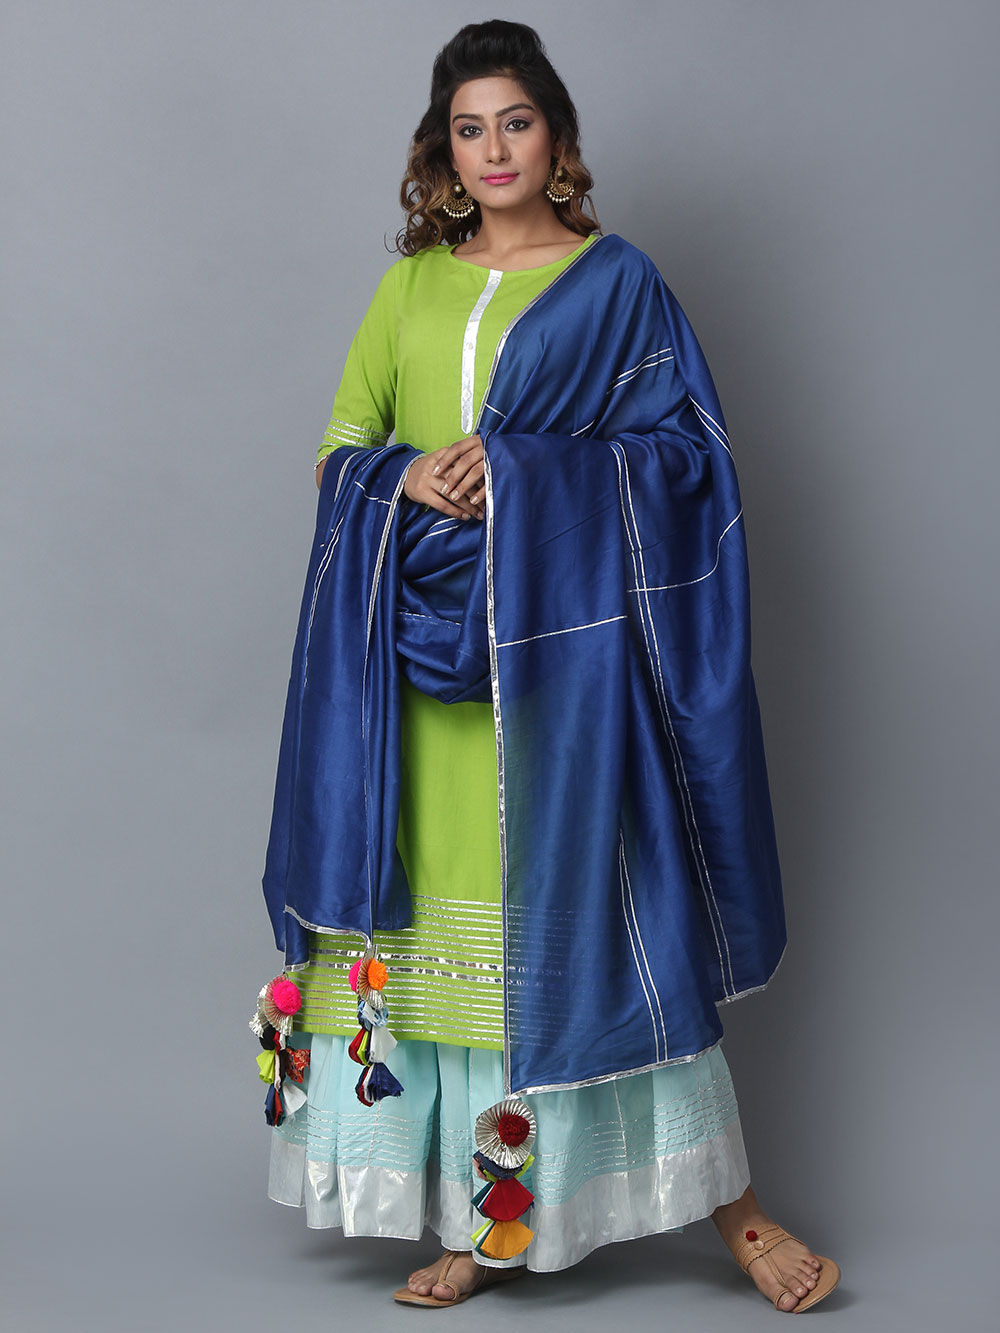 15 Latest Color Combinations For Churidhars Salwar Kameez Keep Me Stylish,Mint Green Combination Color